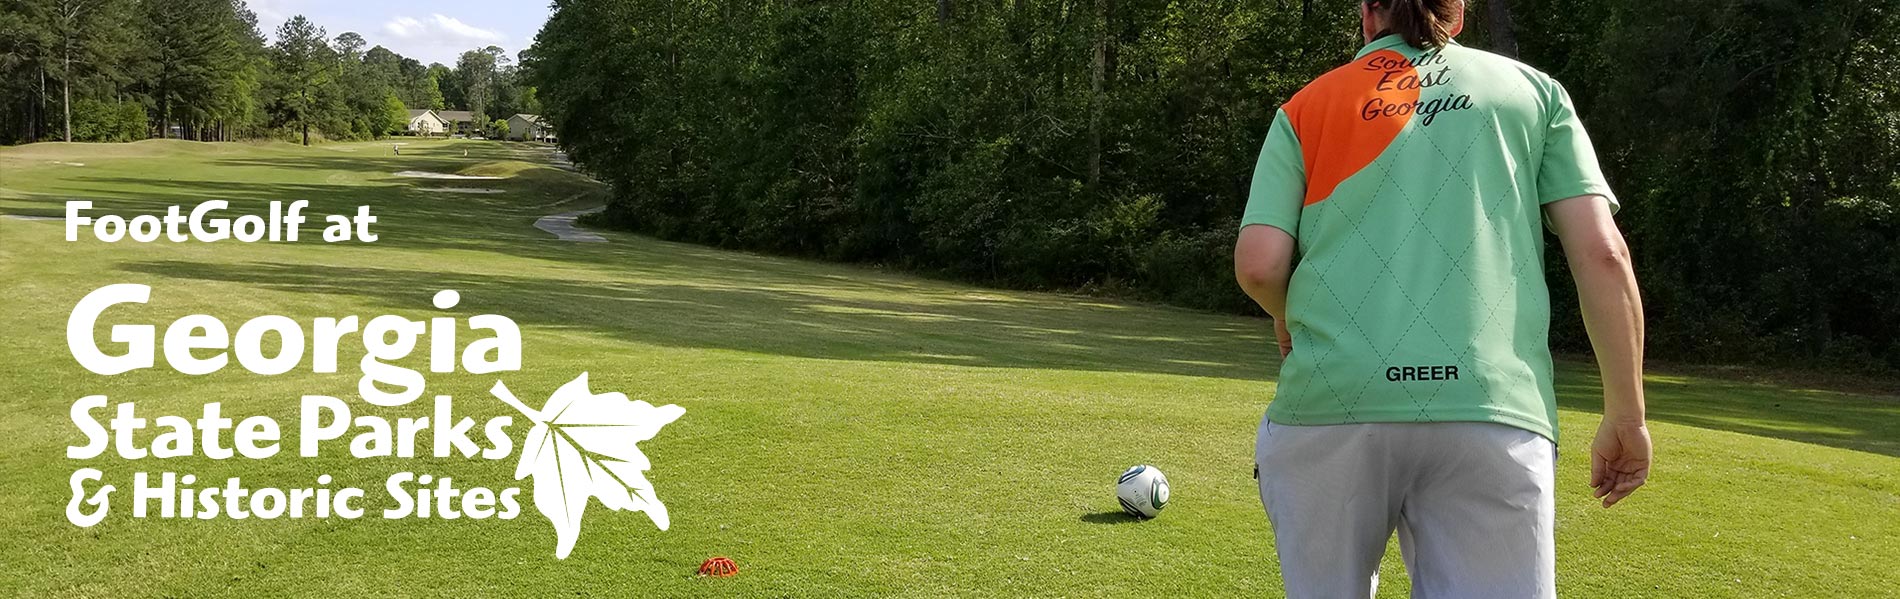 FootGolf at Georgia State Parks